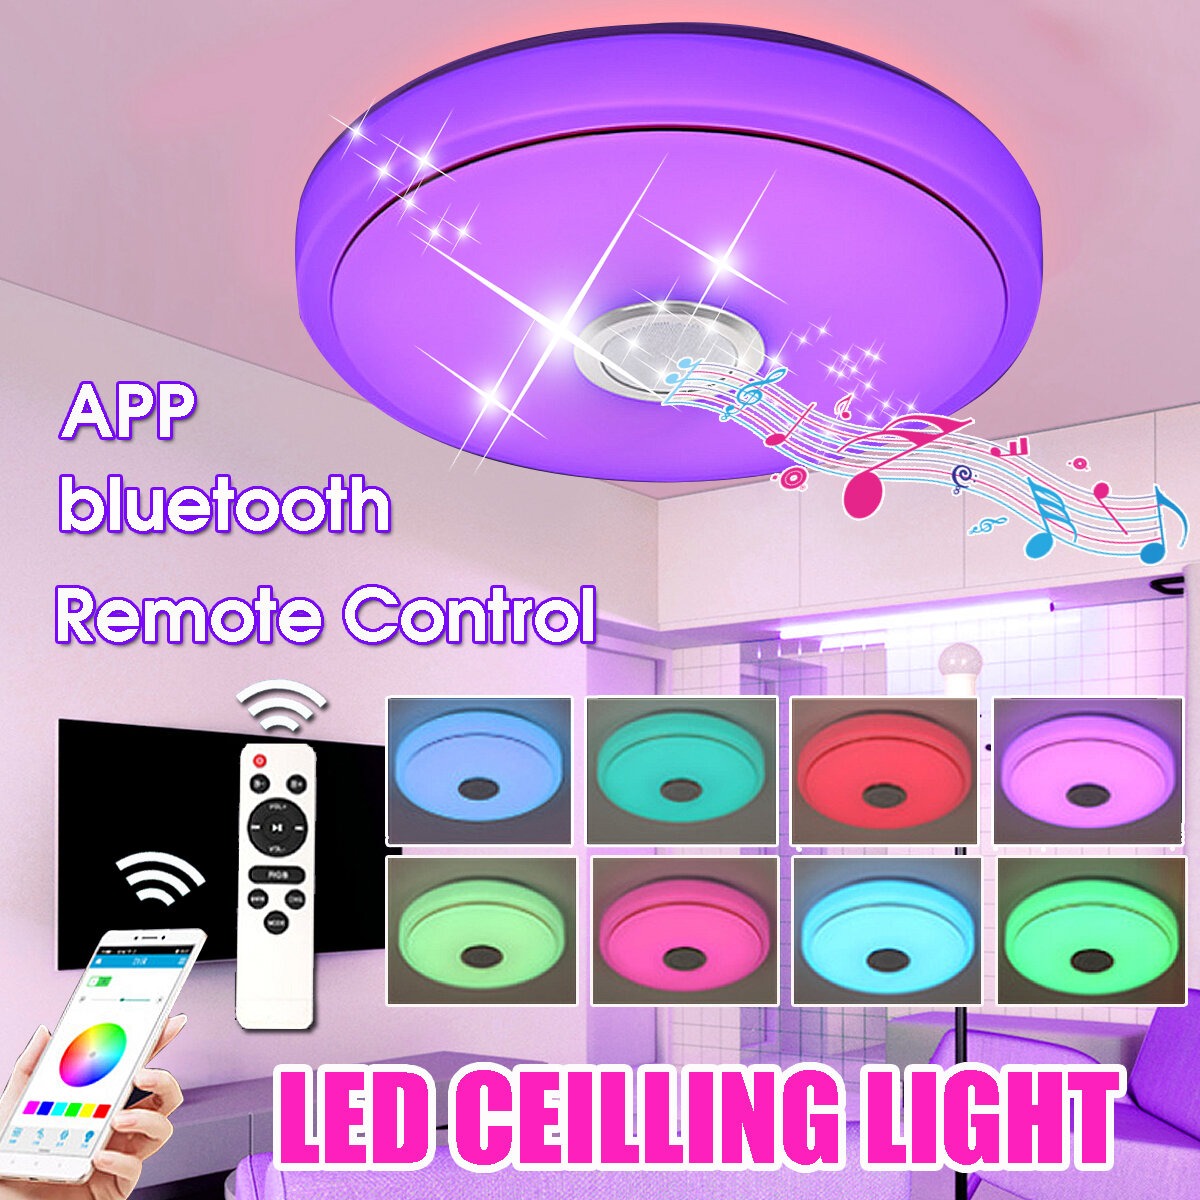 

33CM 220V LED Ceiling Light RGB bluetooth Music Speaker Dimmable Lamp APP Remote Control